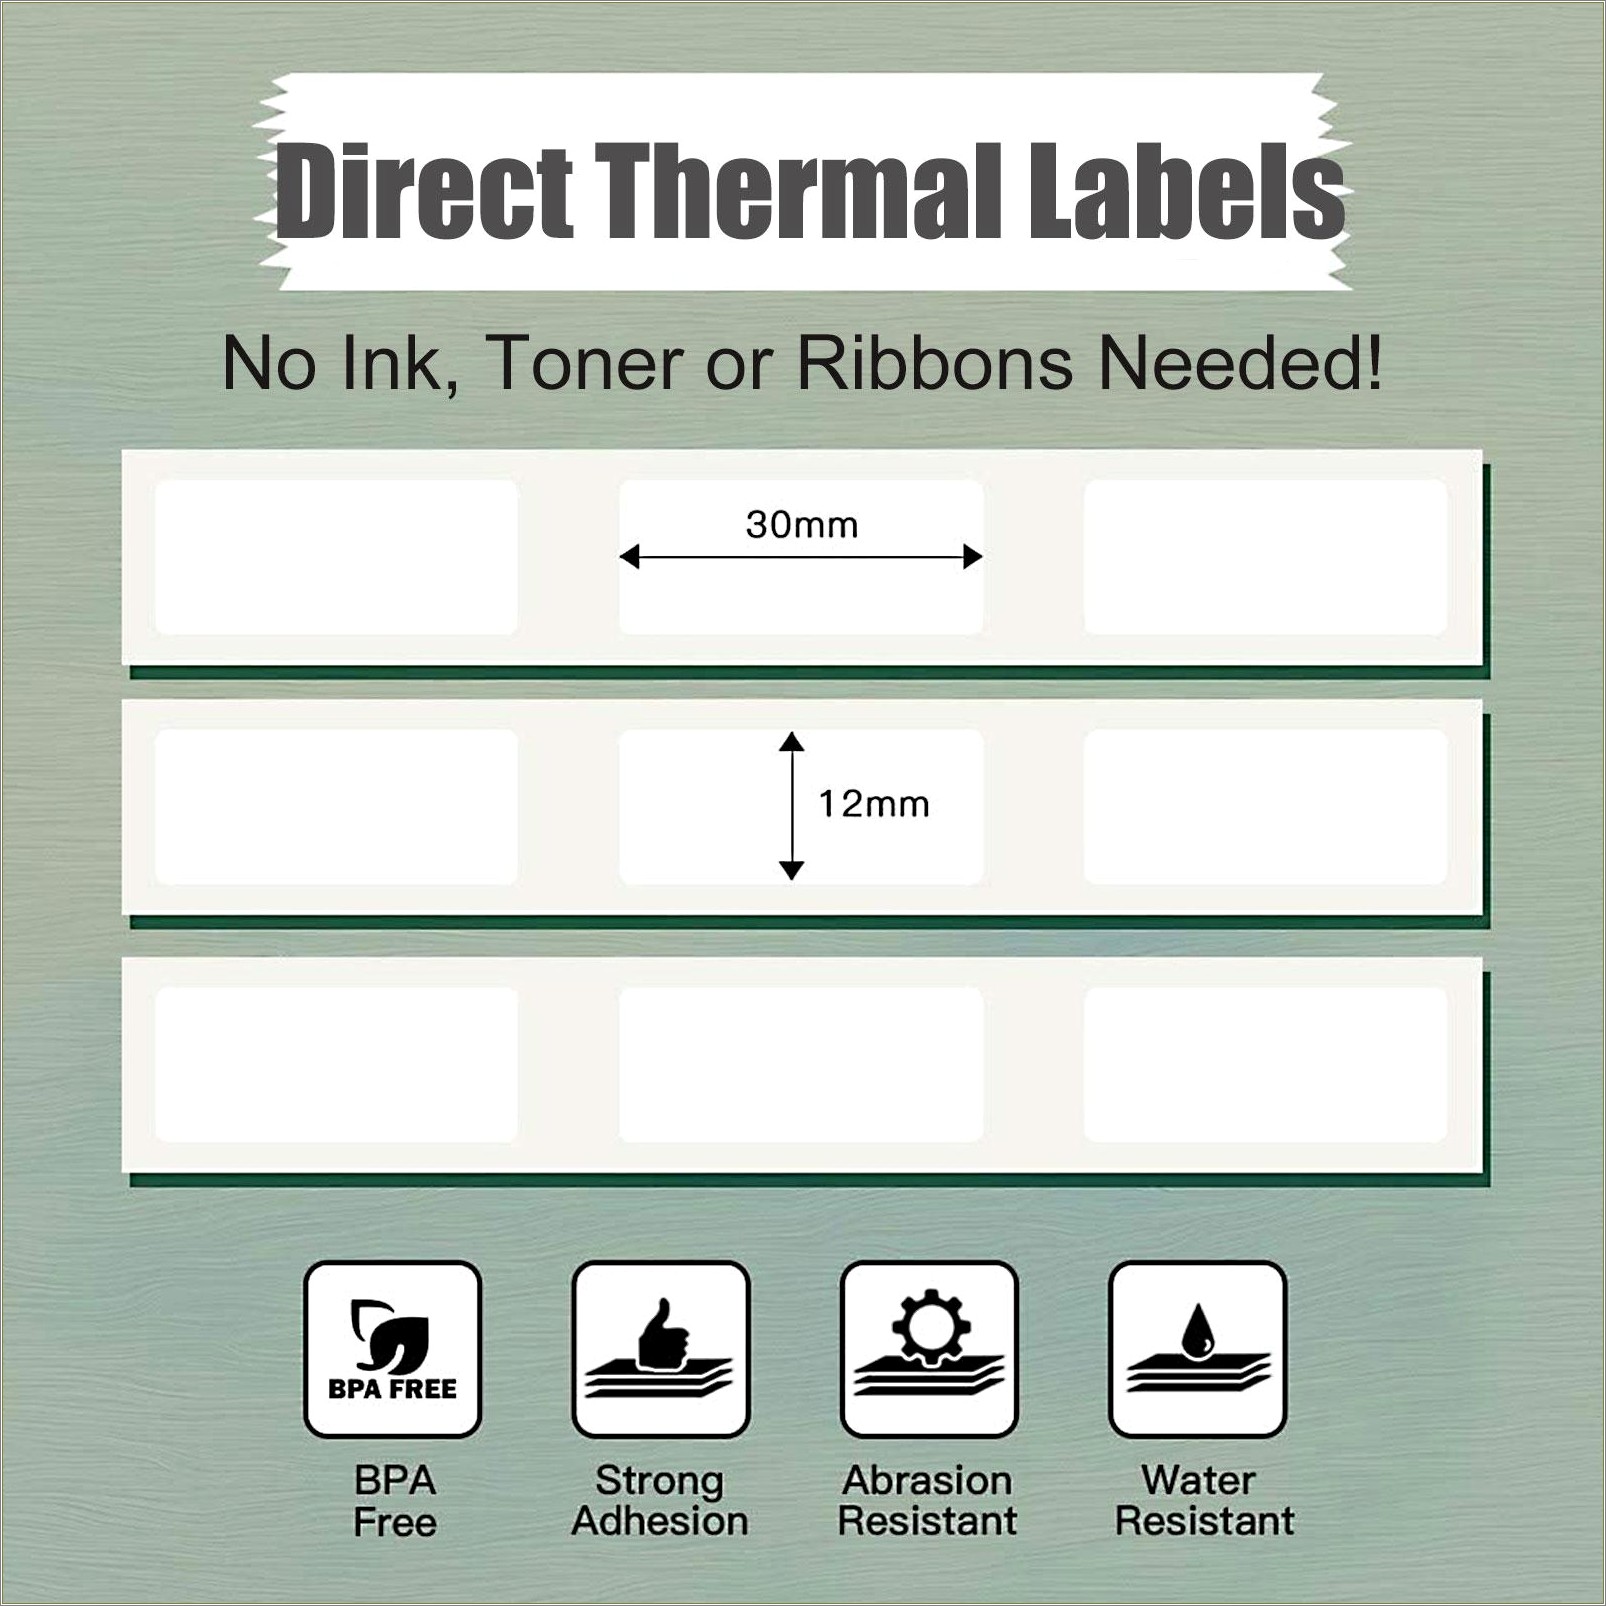 Crystal Reports 4x6 Zebra Label Template Free Download